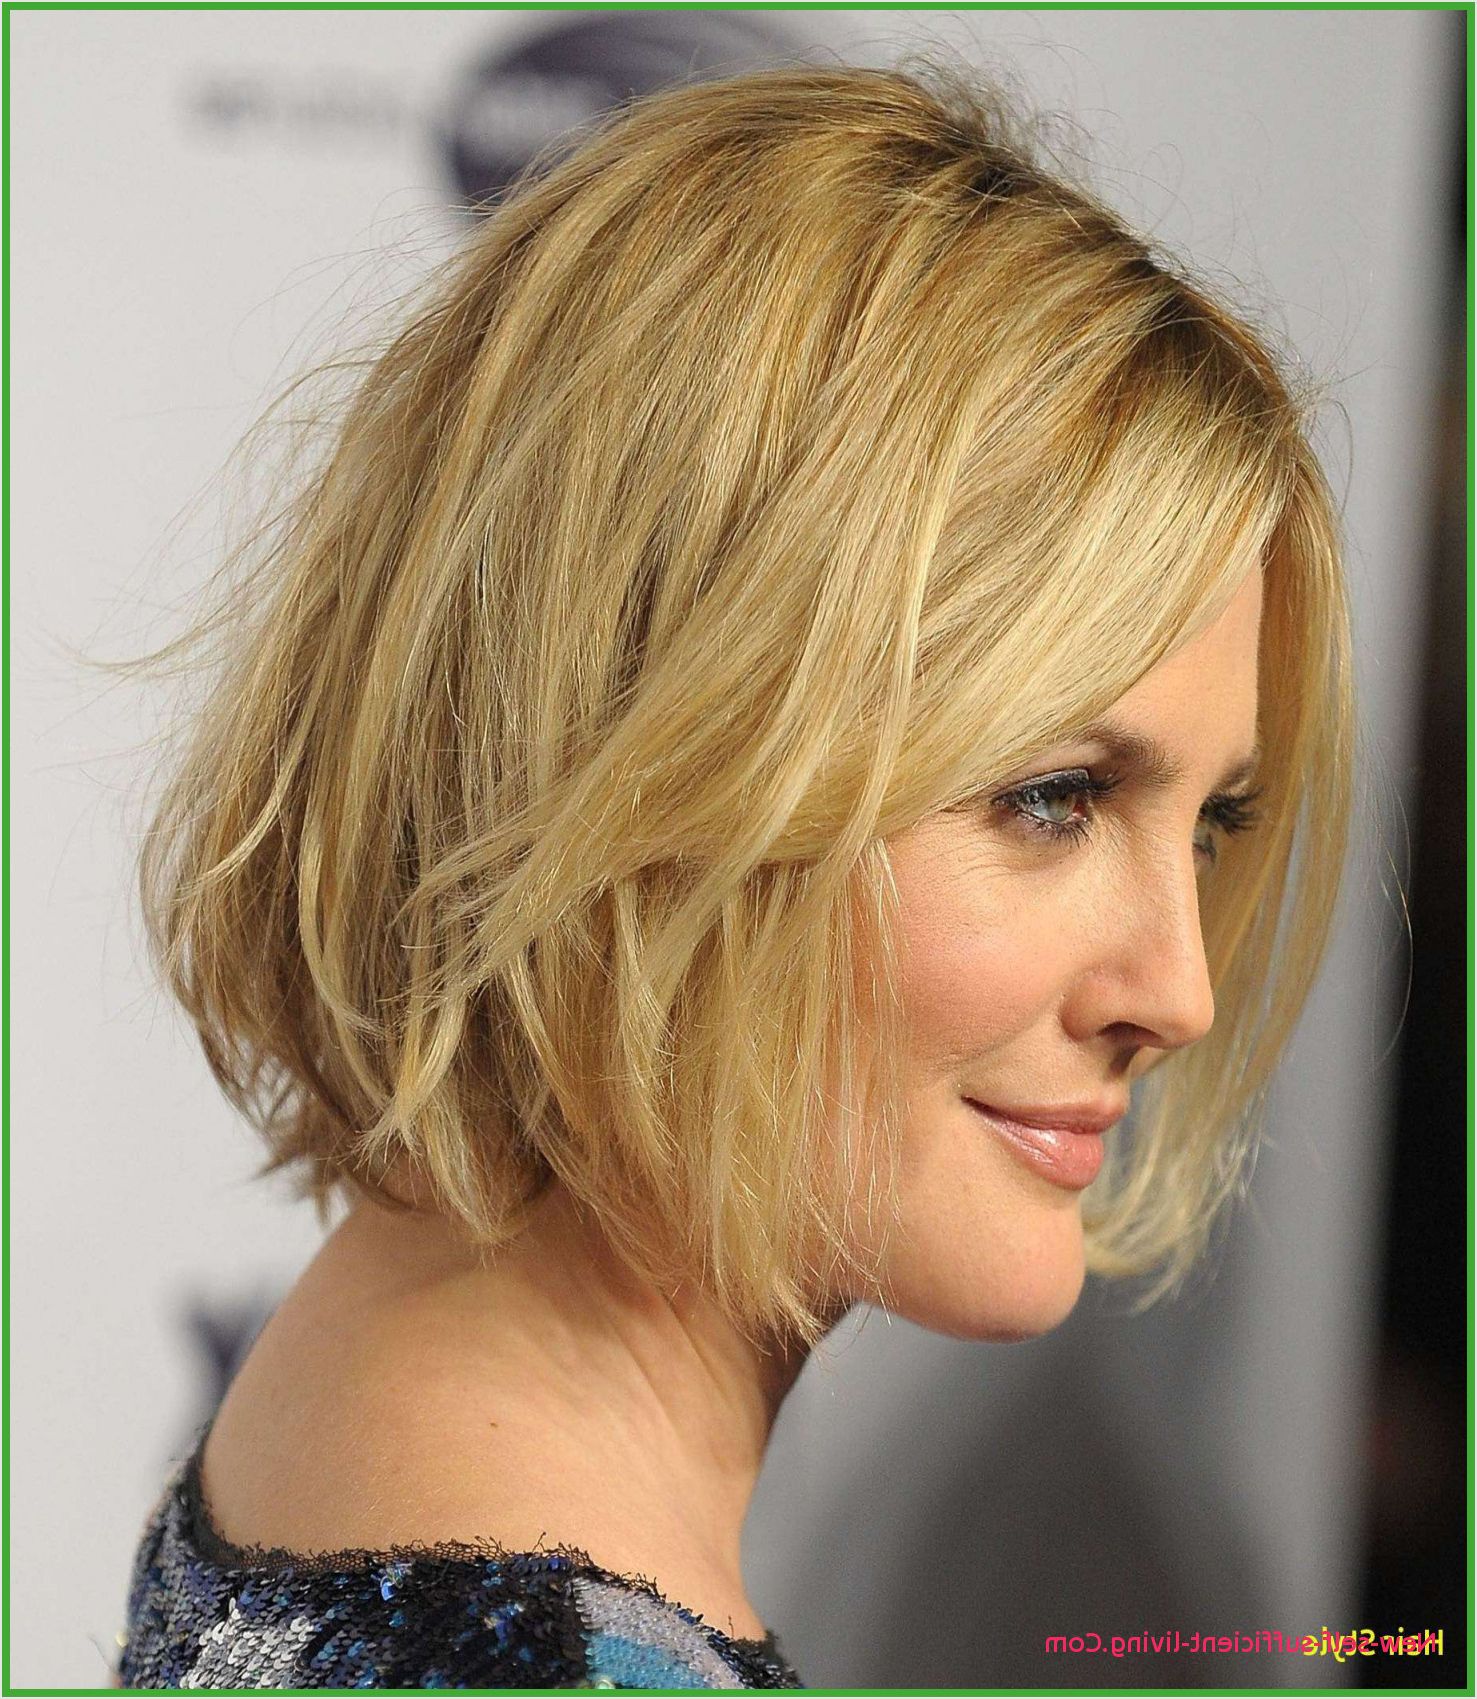 Hairstyles : Inverted Bob With Bangs And Layers Agreeable For Razored Two Layer Bob Hairstyles For Thick Hair (View 14 of 20)